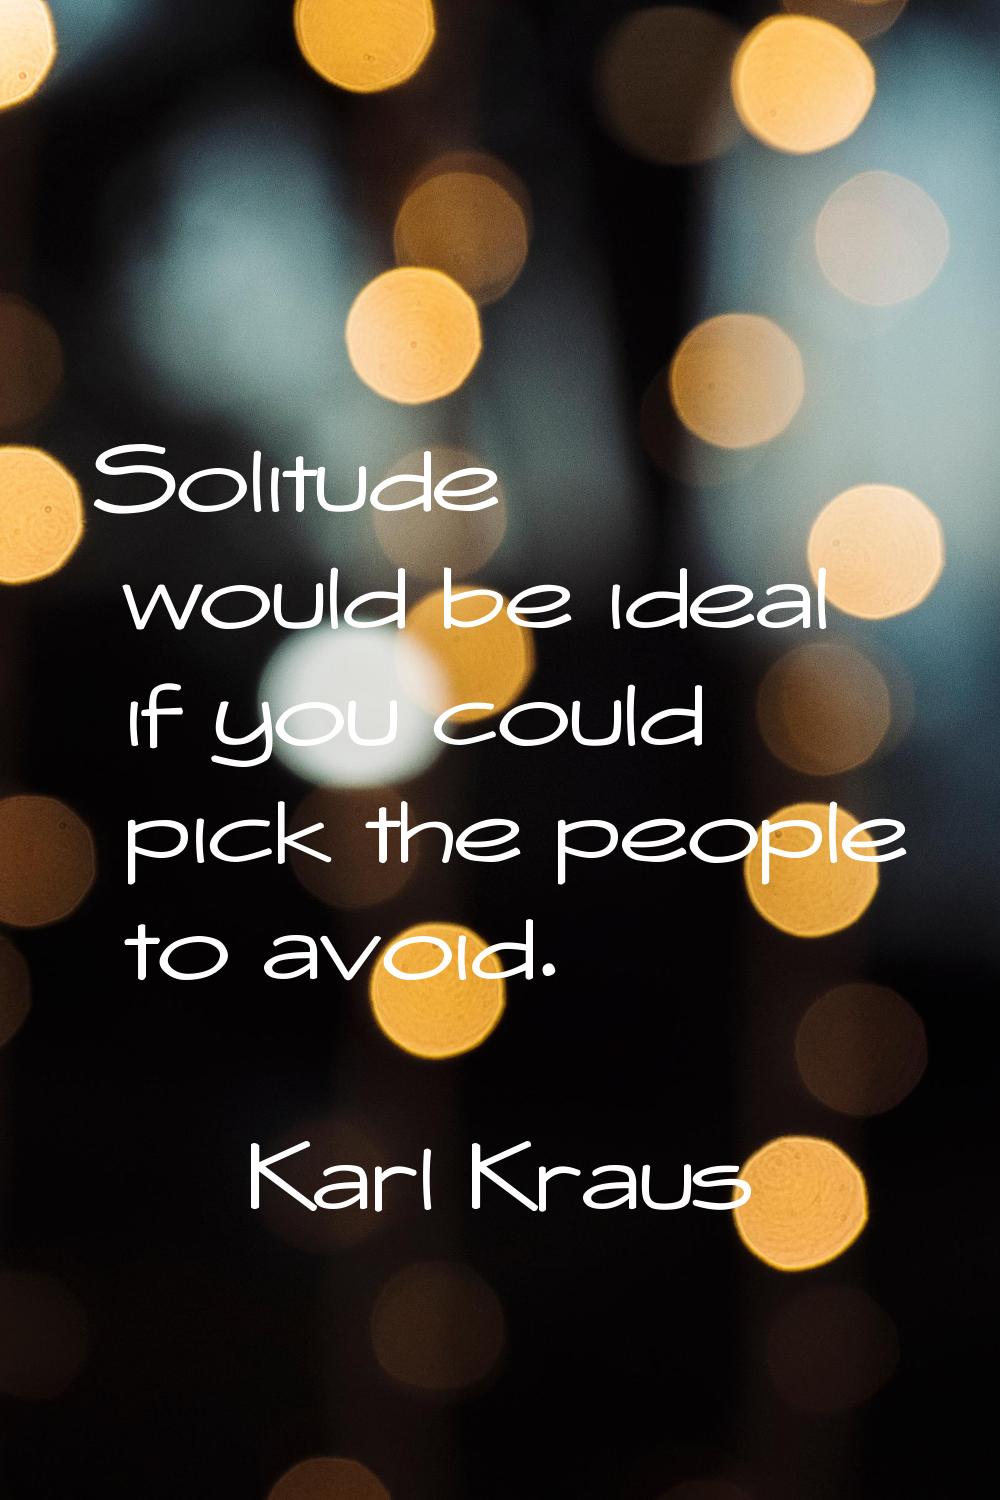 Solitude would be ideal if you could pick the people to avoid.